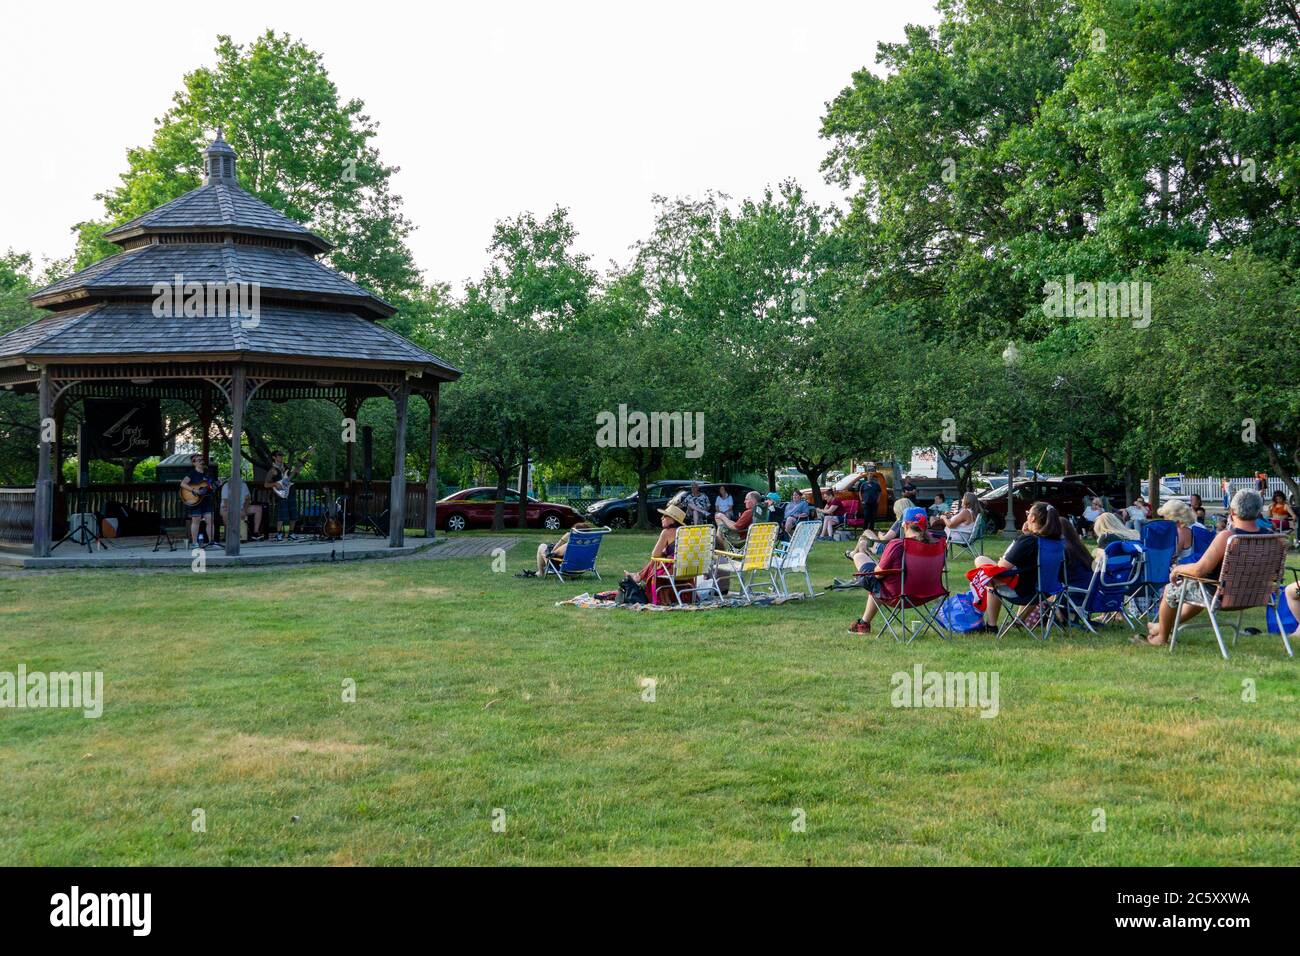 McGowan Park Summer Concerts - Sandy Stones Trio Band - Spectators wearing masks and social distancing Stock Photo